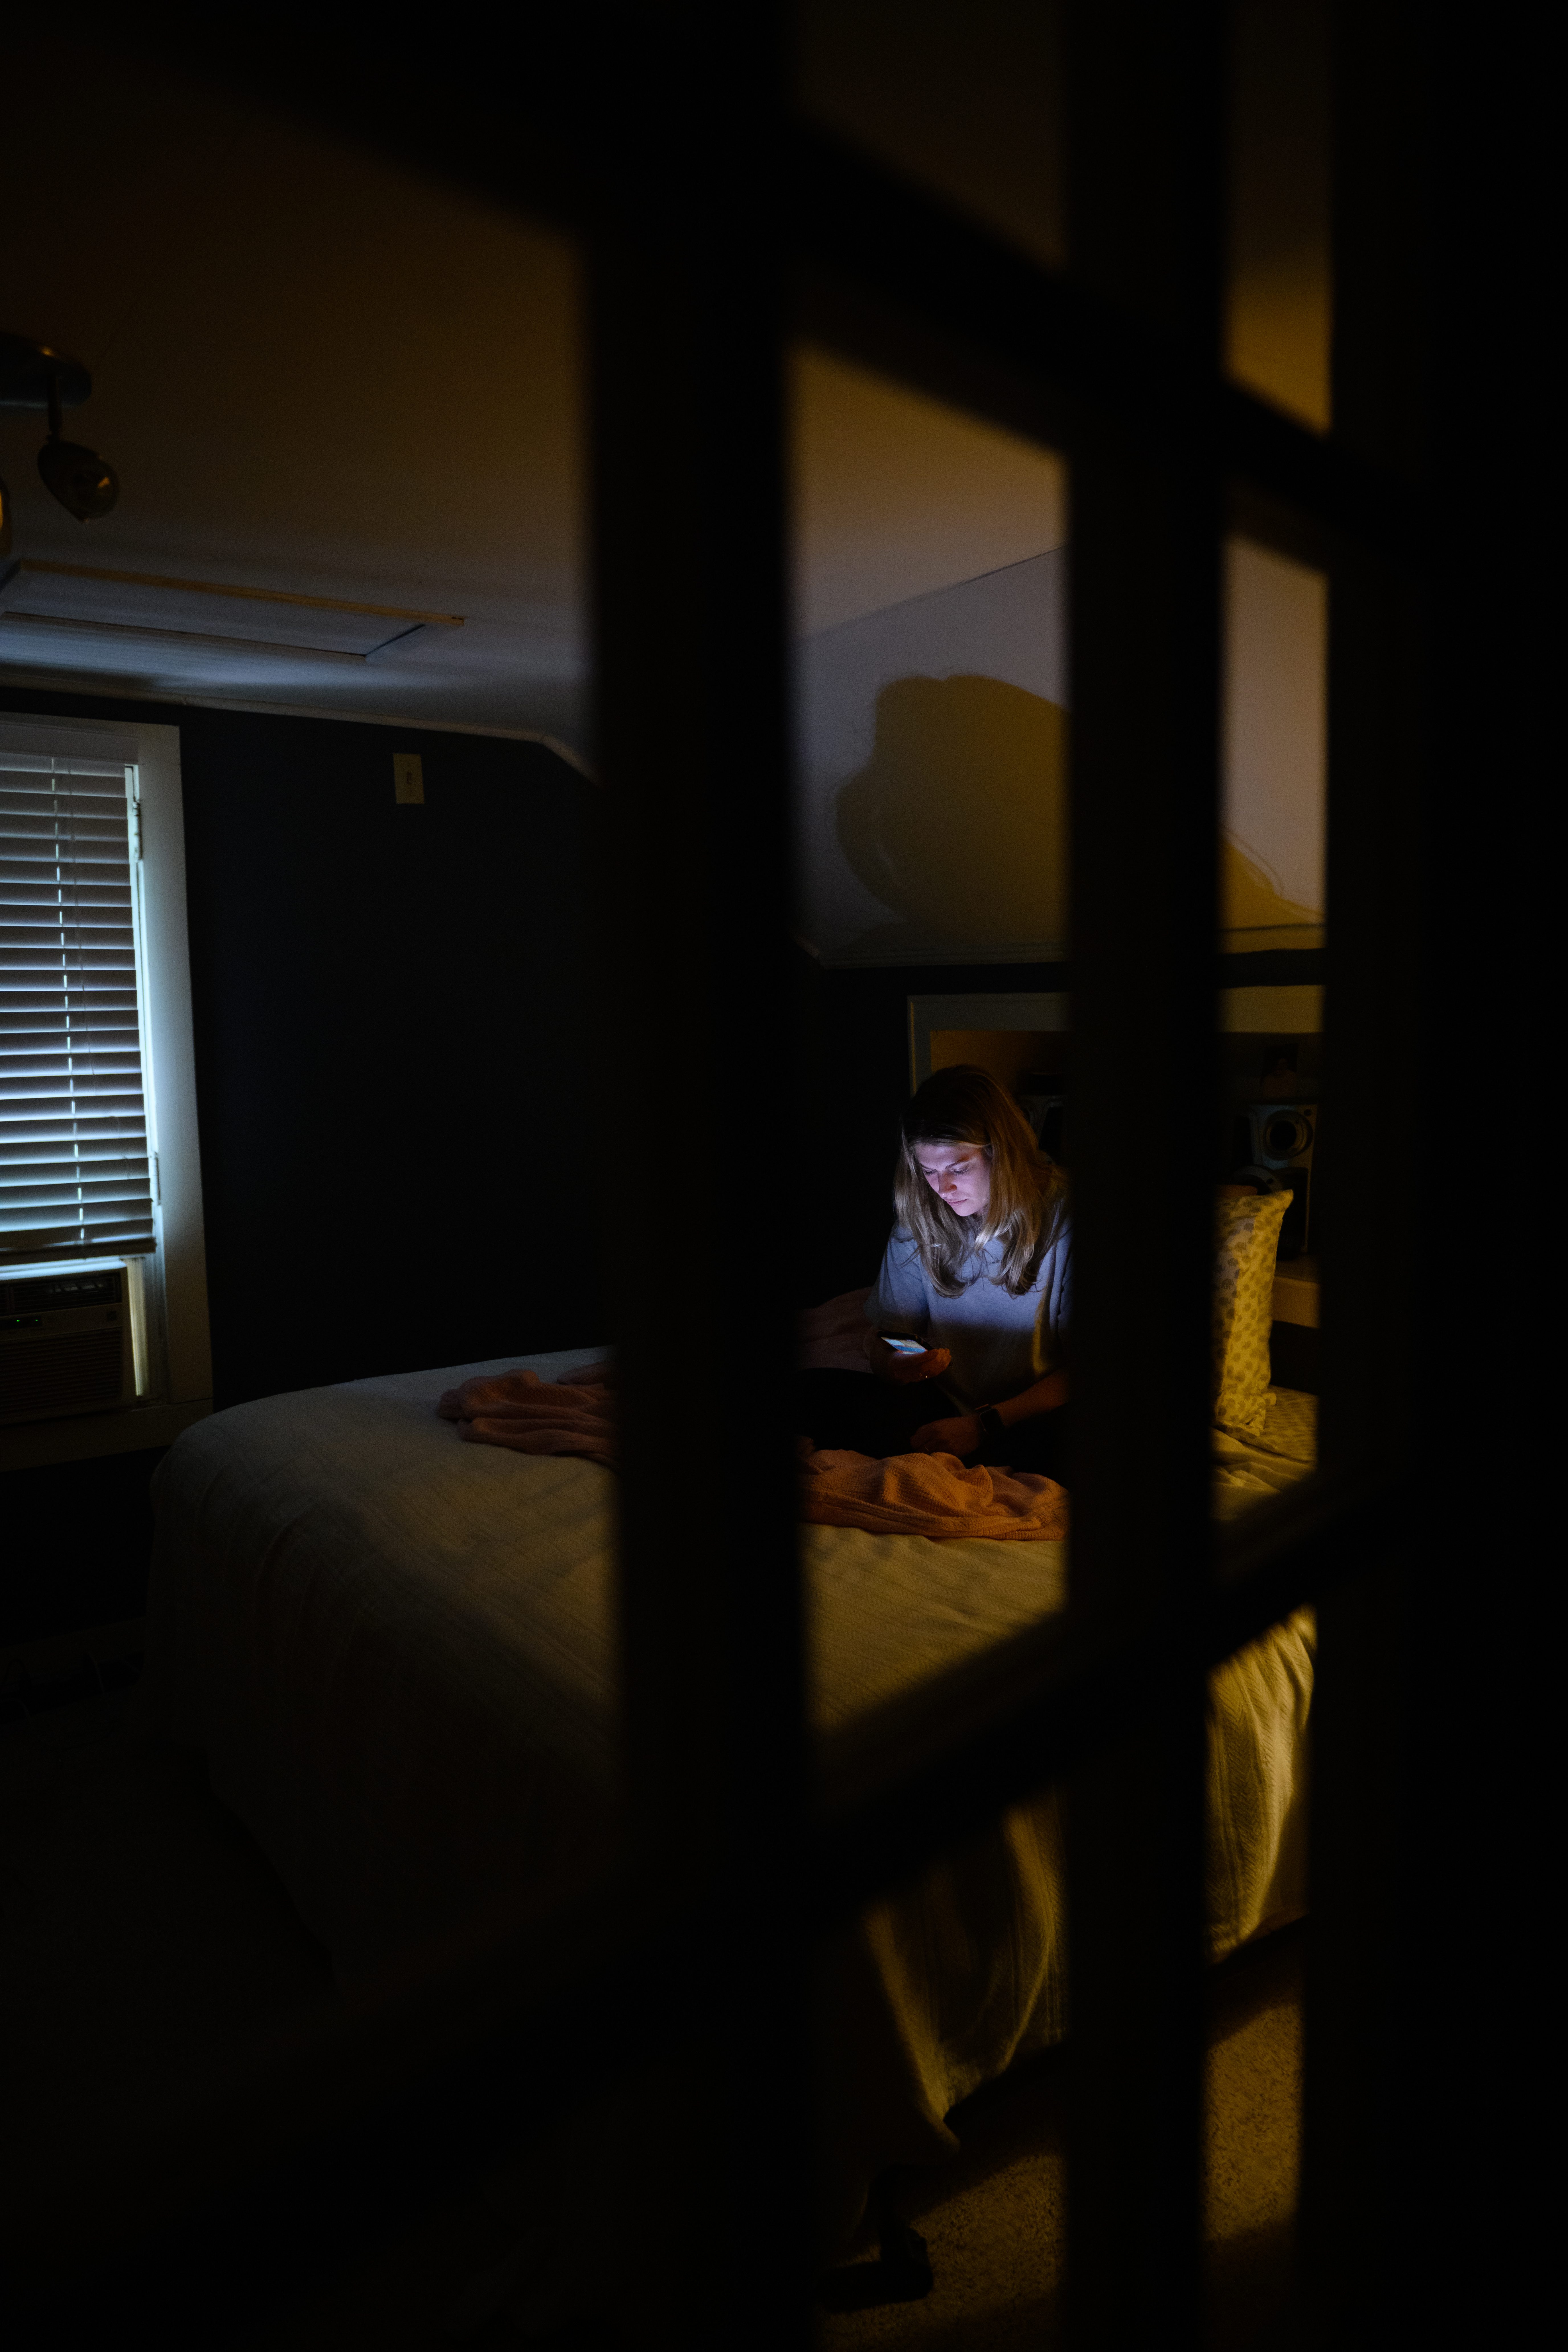 A young woman sits in a dark room on a bed looking at the lit screen of a cell phone.